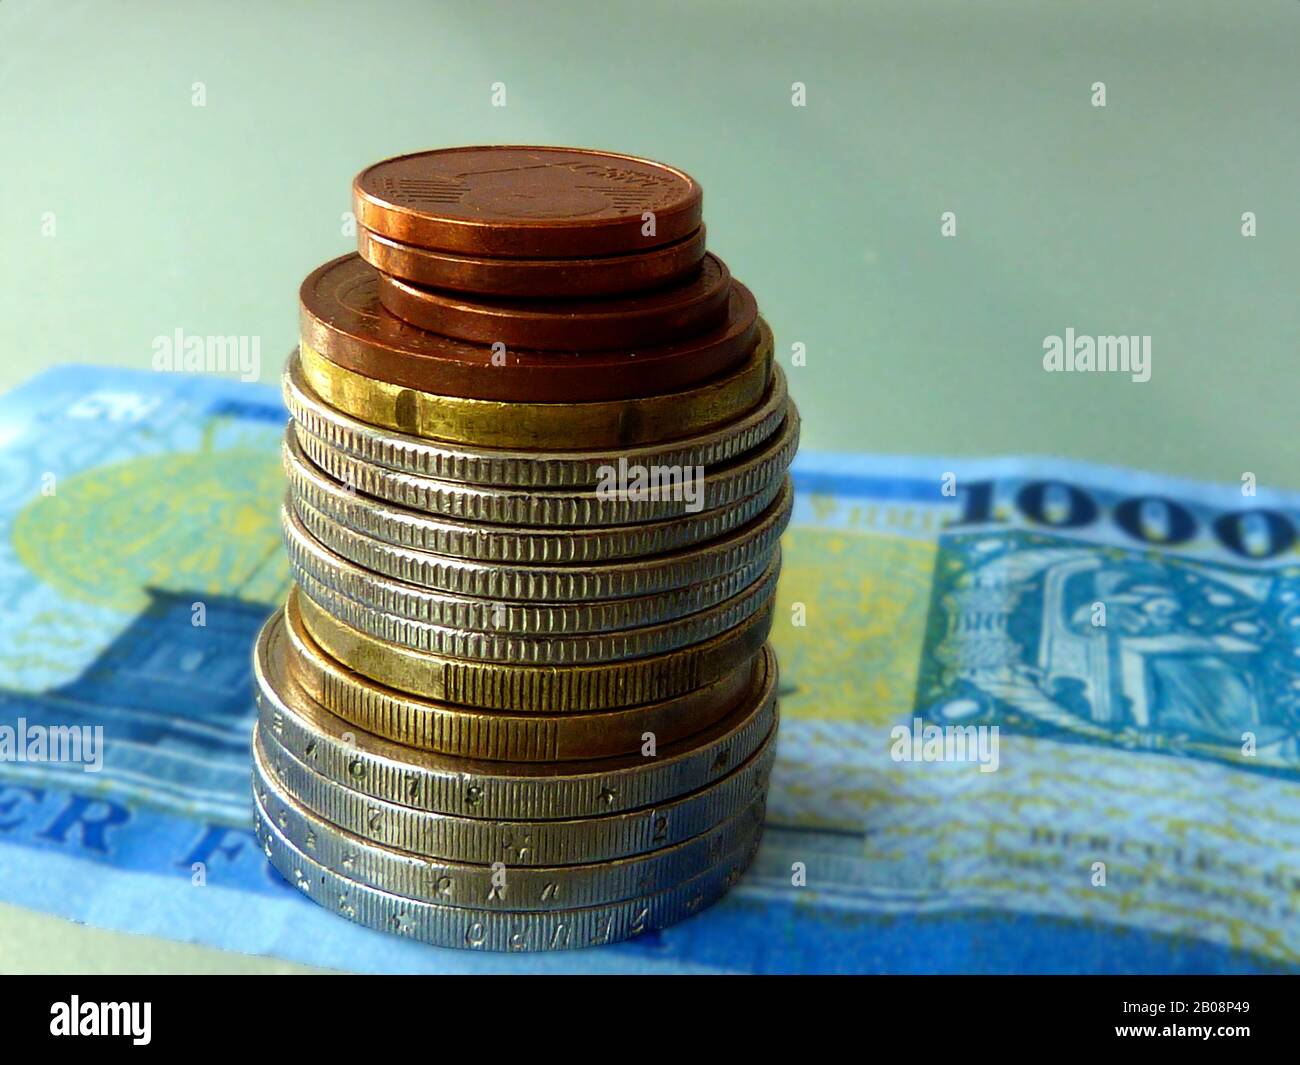 stacking coins concept. various nickel chrome and copper various coins stacked in a small pile on top of blue paper bill. saving theme Stock Photo